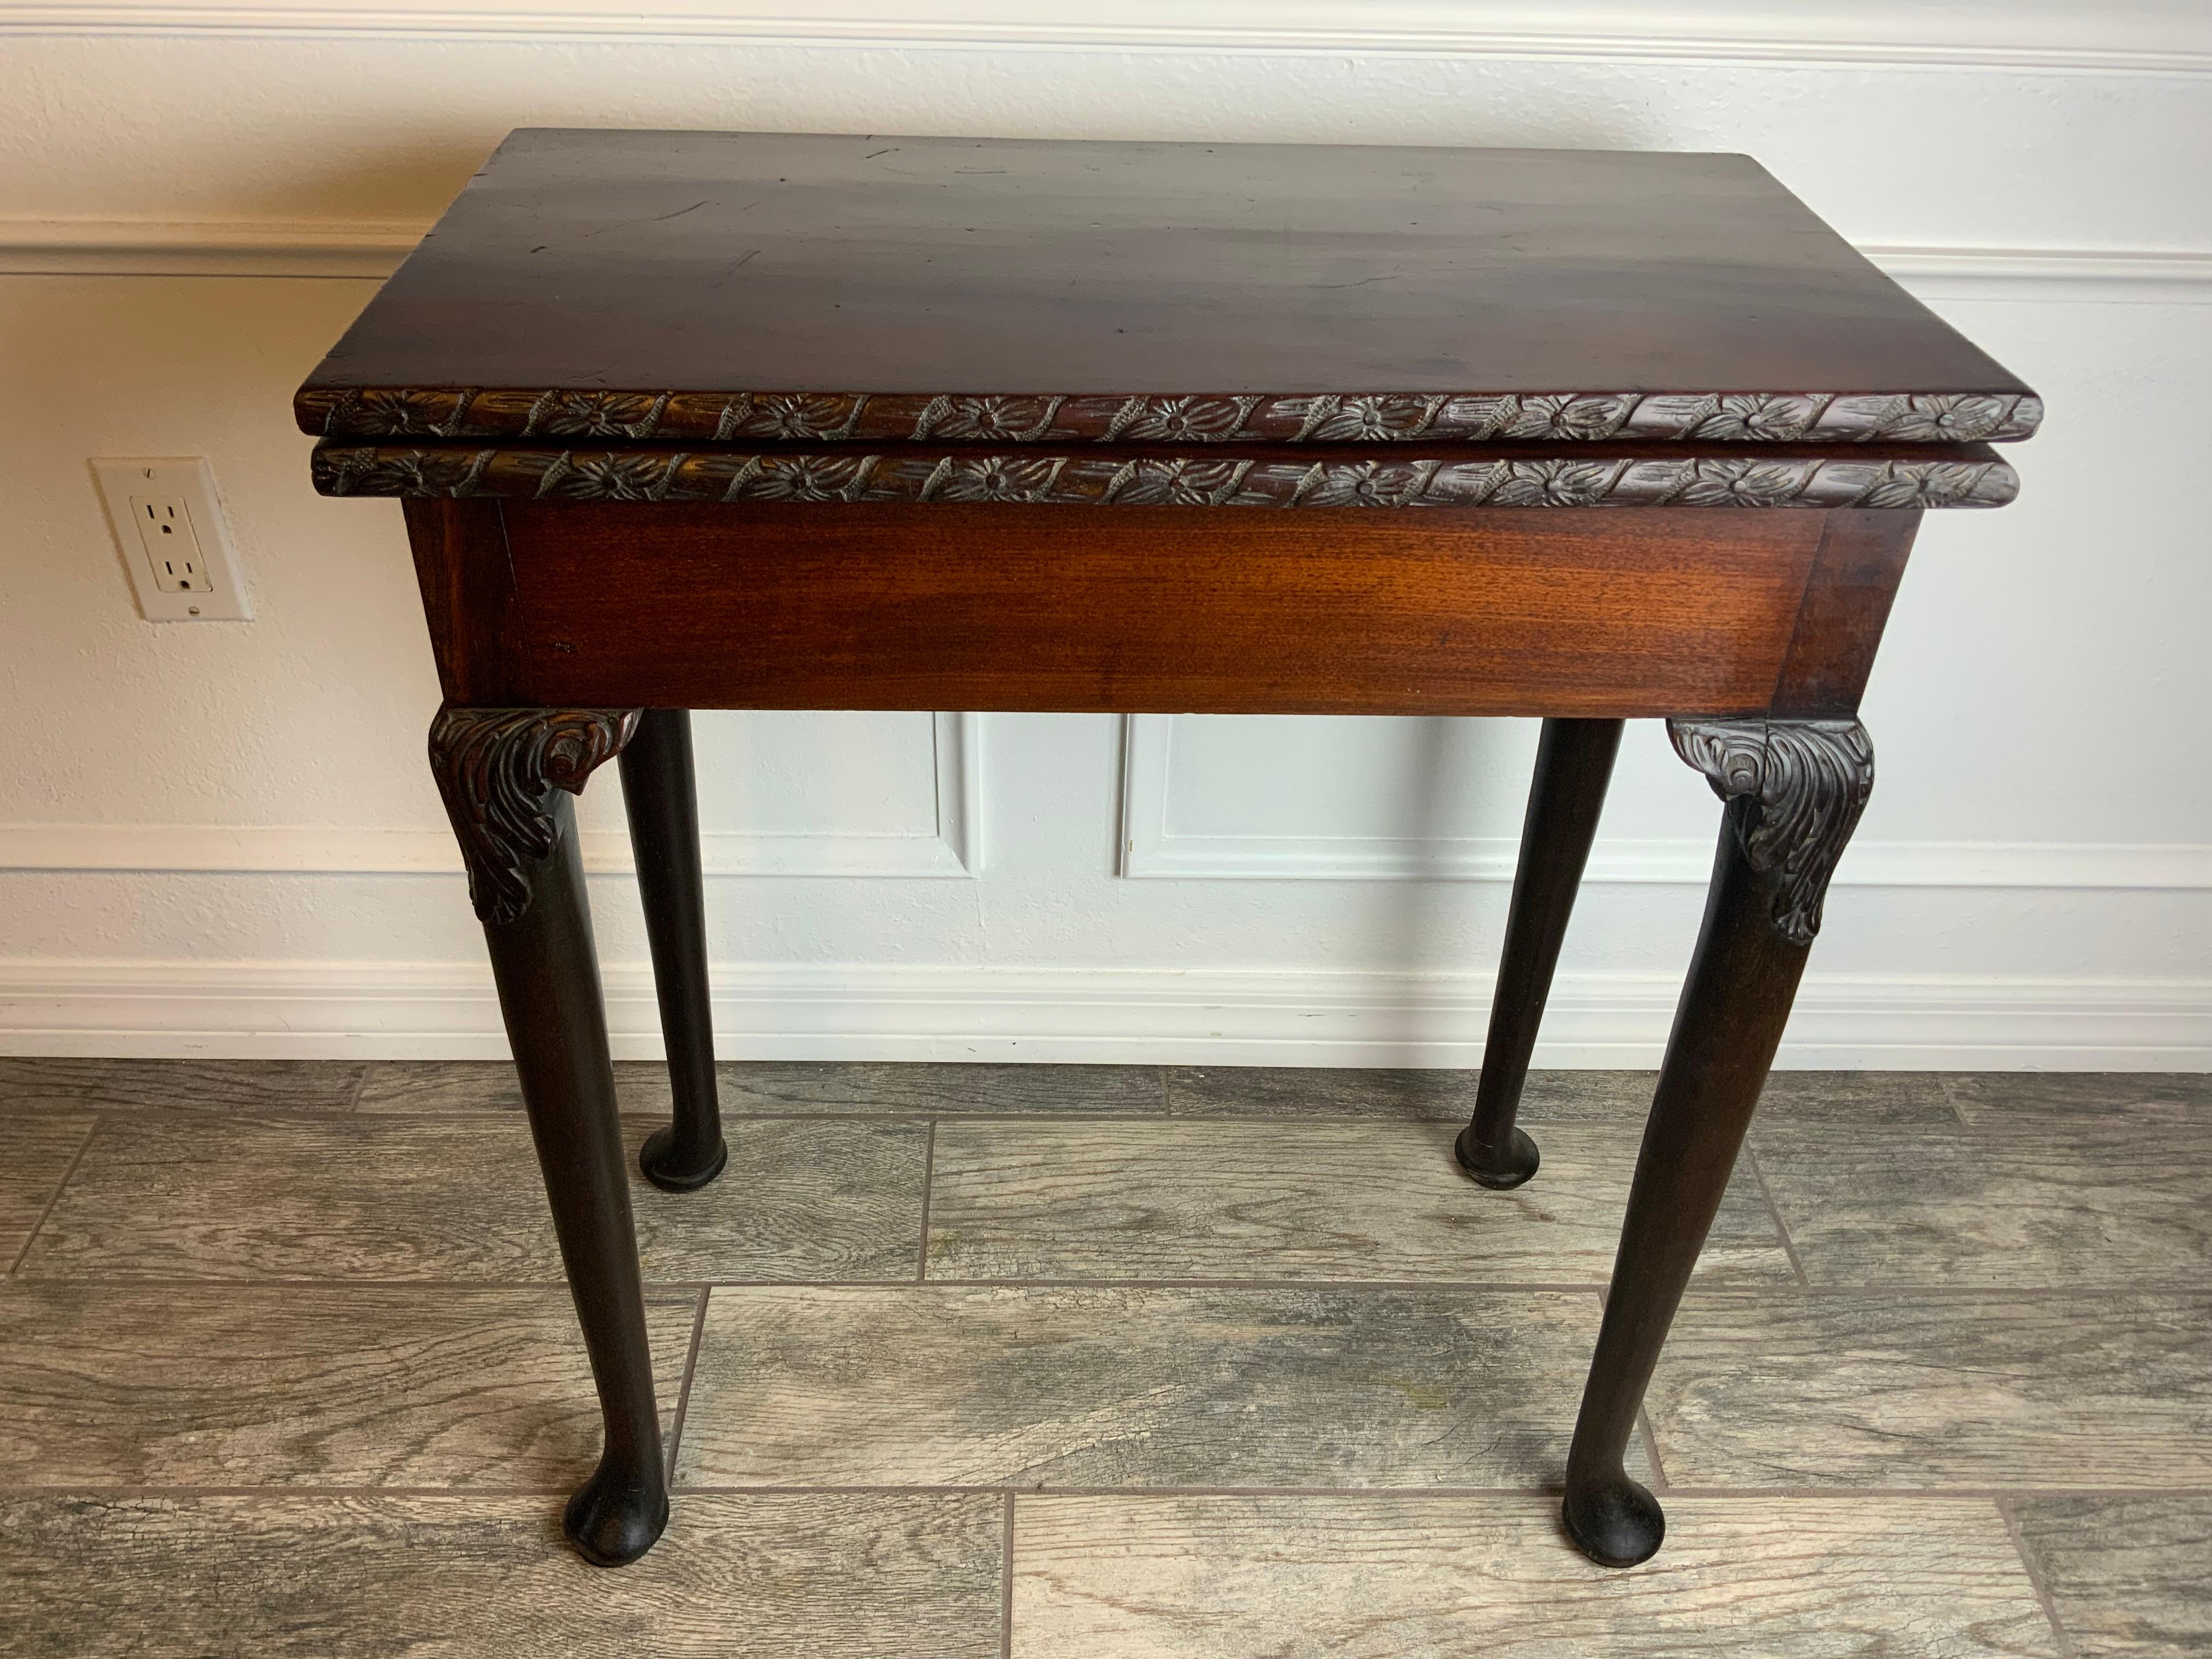 A very nice early Georgian Mahogany swing leg Tea or Card Table of diminutive proportions with carved knee cabriole legs ending in a pad foot.  Ribbon and blossom carved edge around the solid Mahogany tops.  Excellent color and patina on the